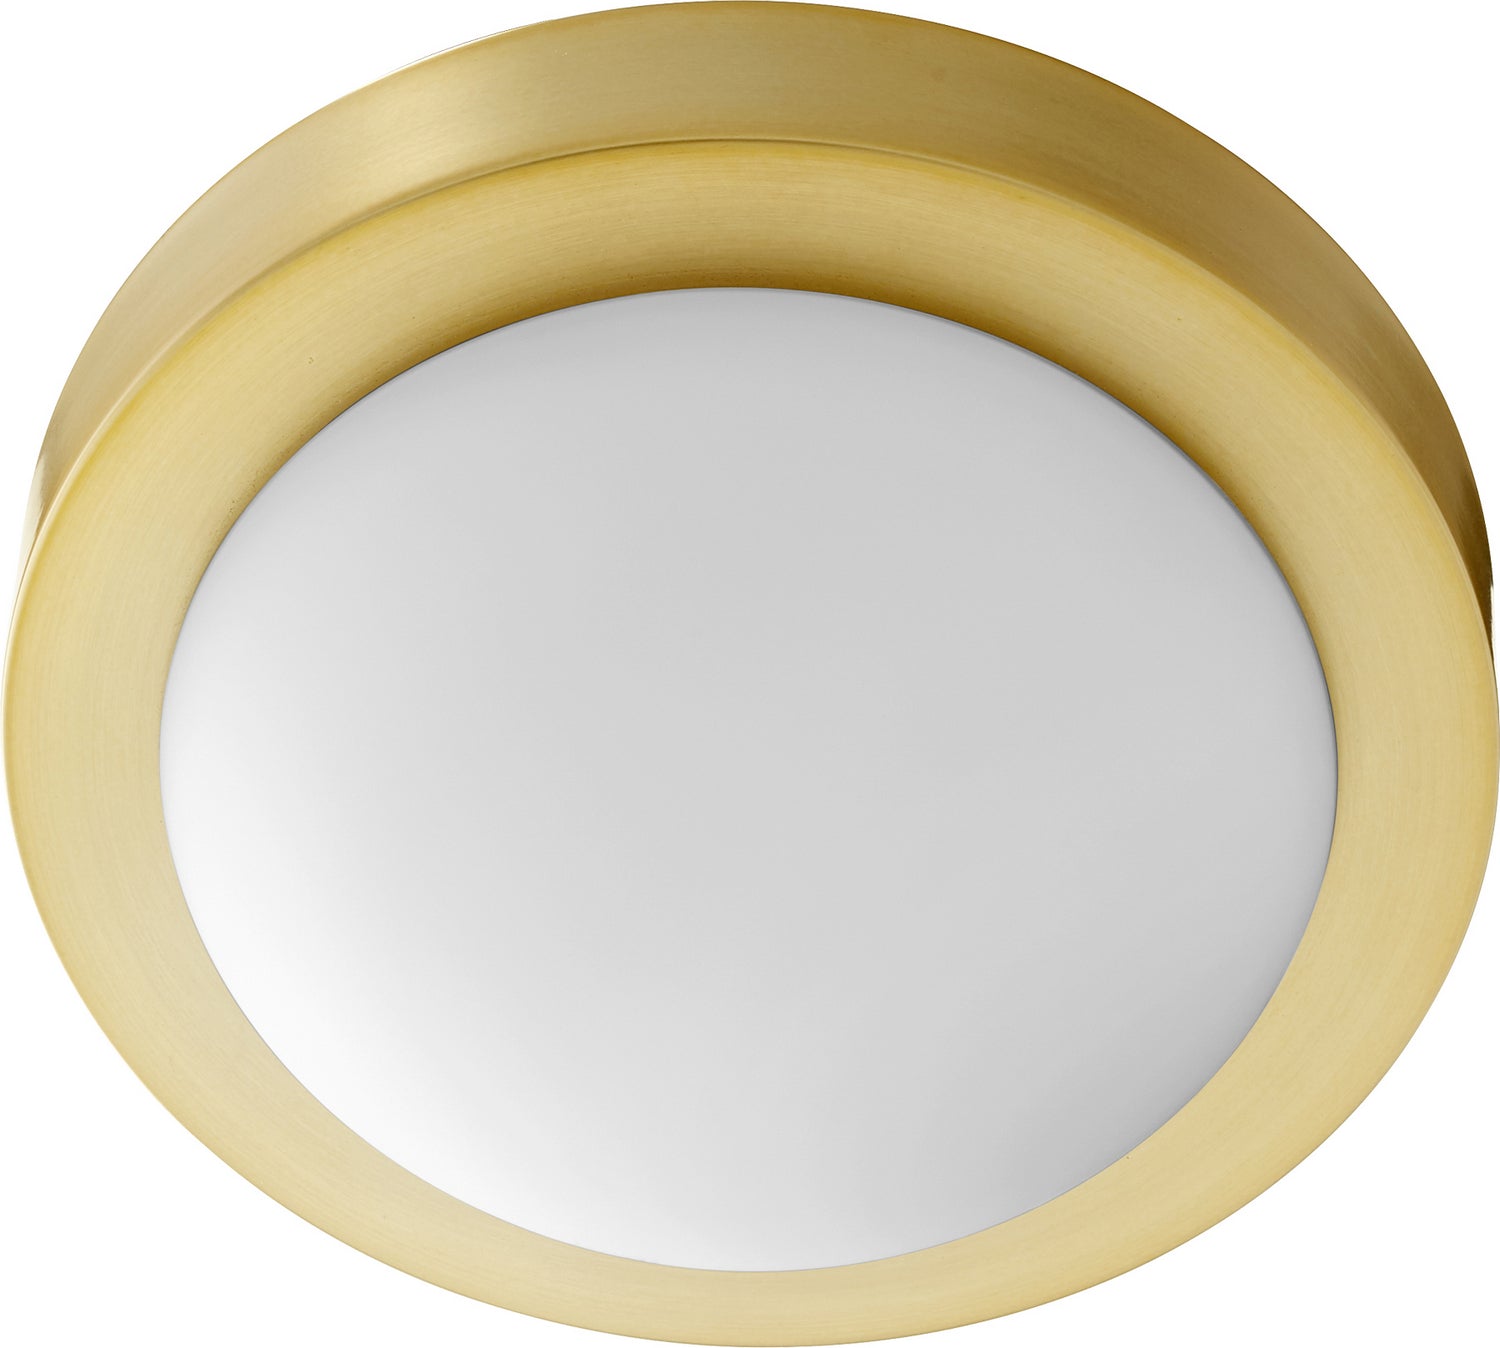 Quorum - 3505-9-80 - One Light Ceiling Mount - 3505 Contempo Ceiling Mounts - Aged Brass